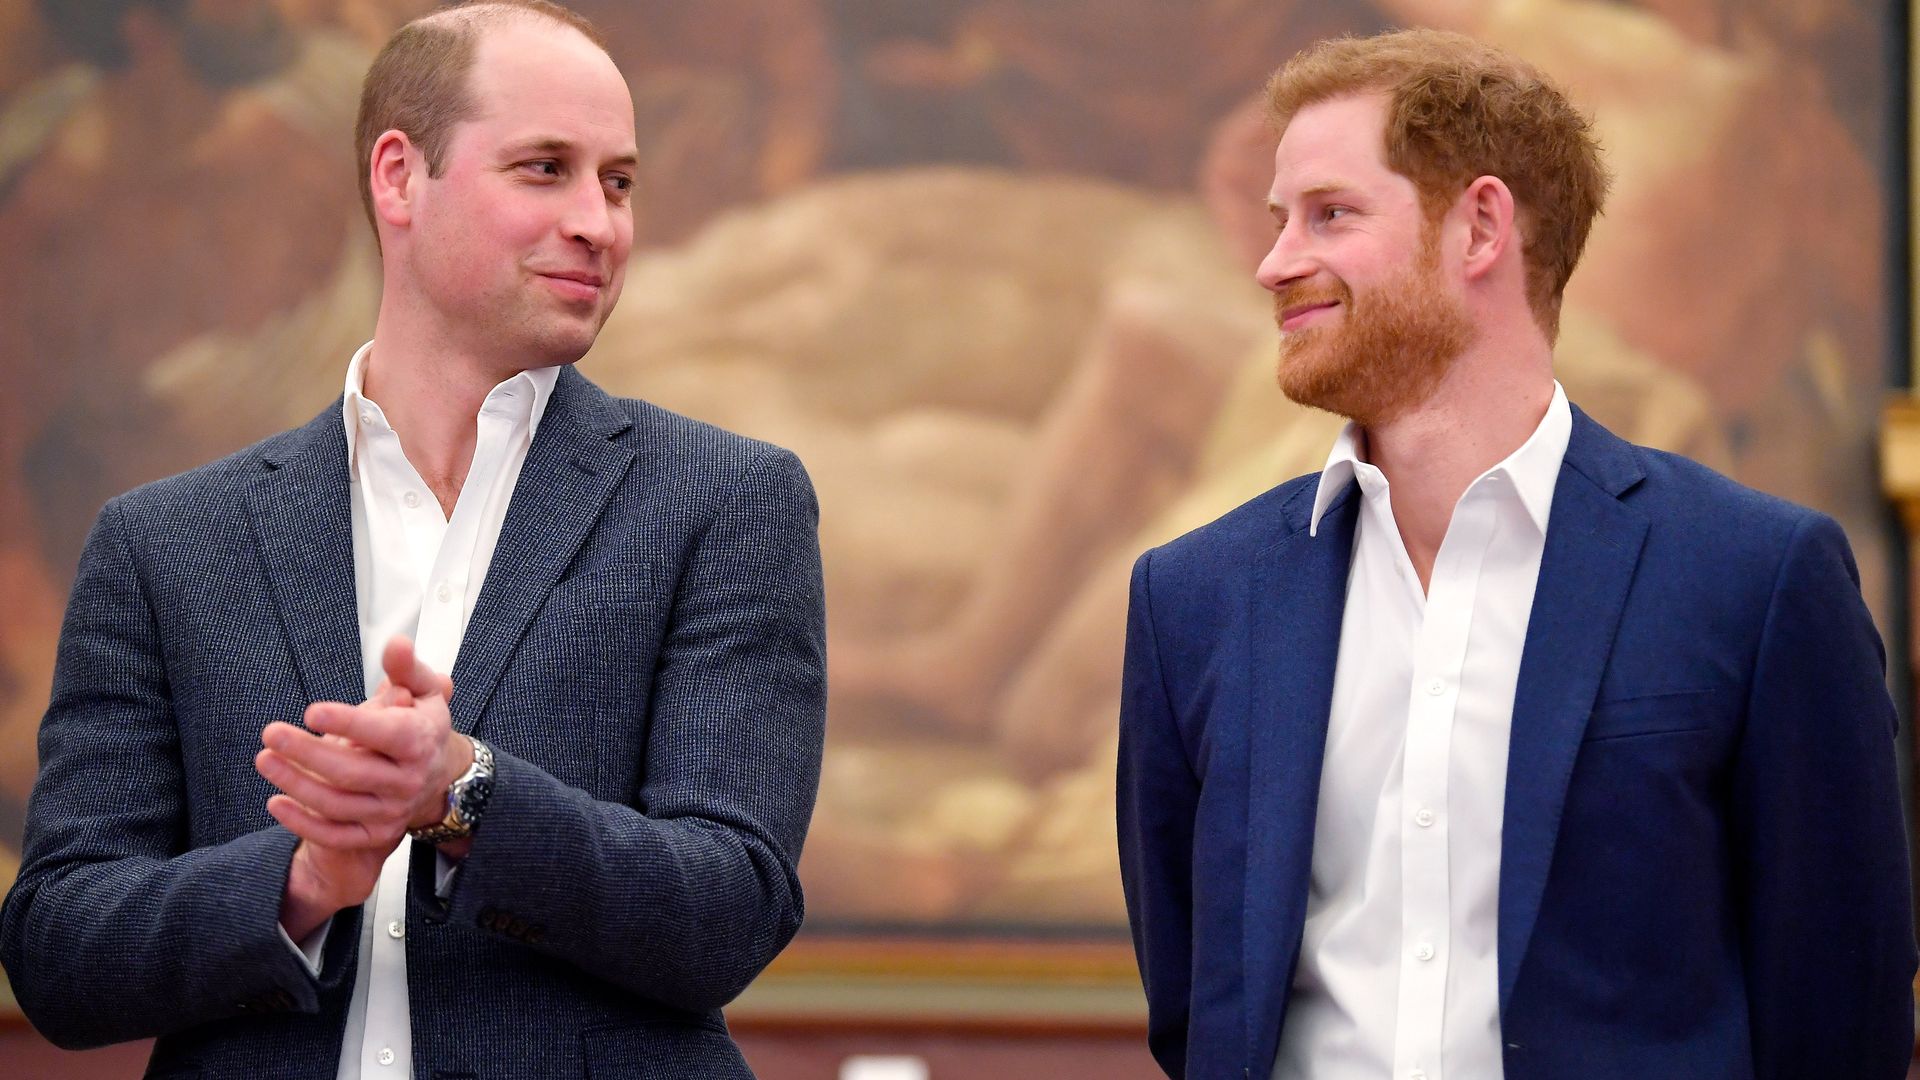 Prince William and Prince Harry smiling at eachother in suit jackets and shirts